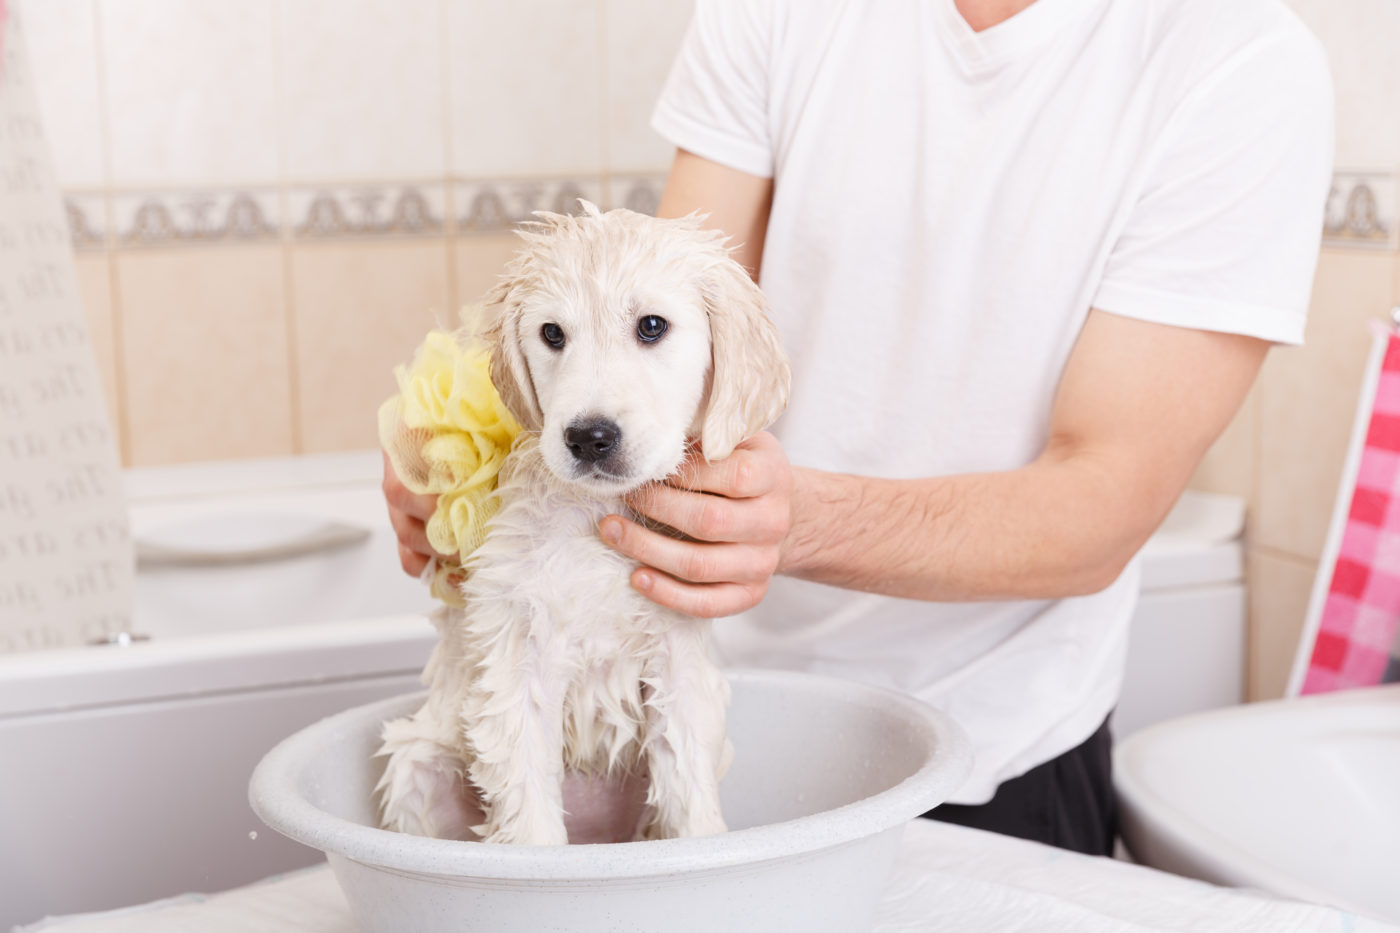 should you groom a puppy